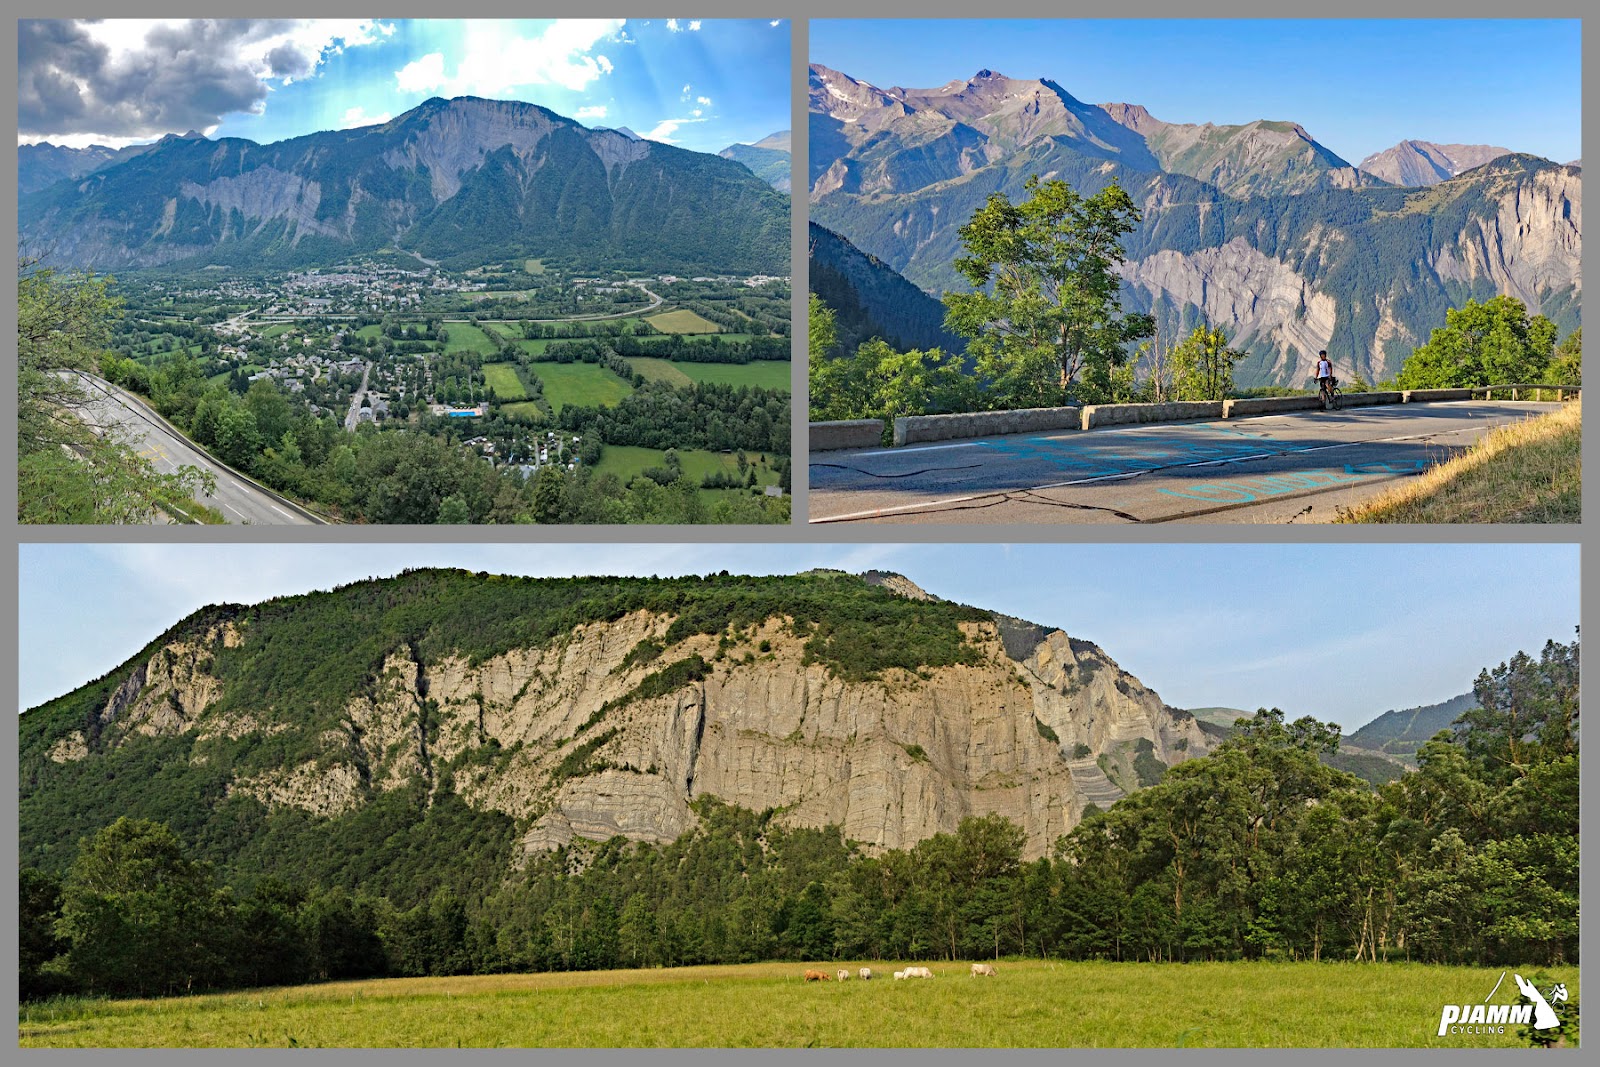 photo collage shows stunning rock formations and mountain views along the Alpe d'Huez climb